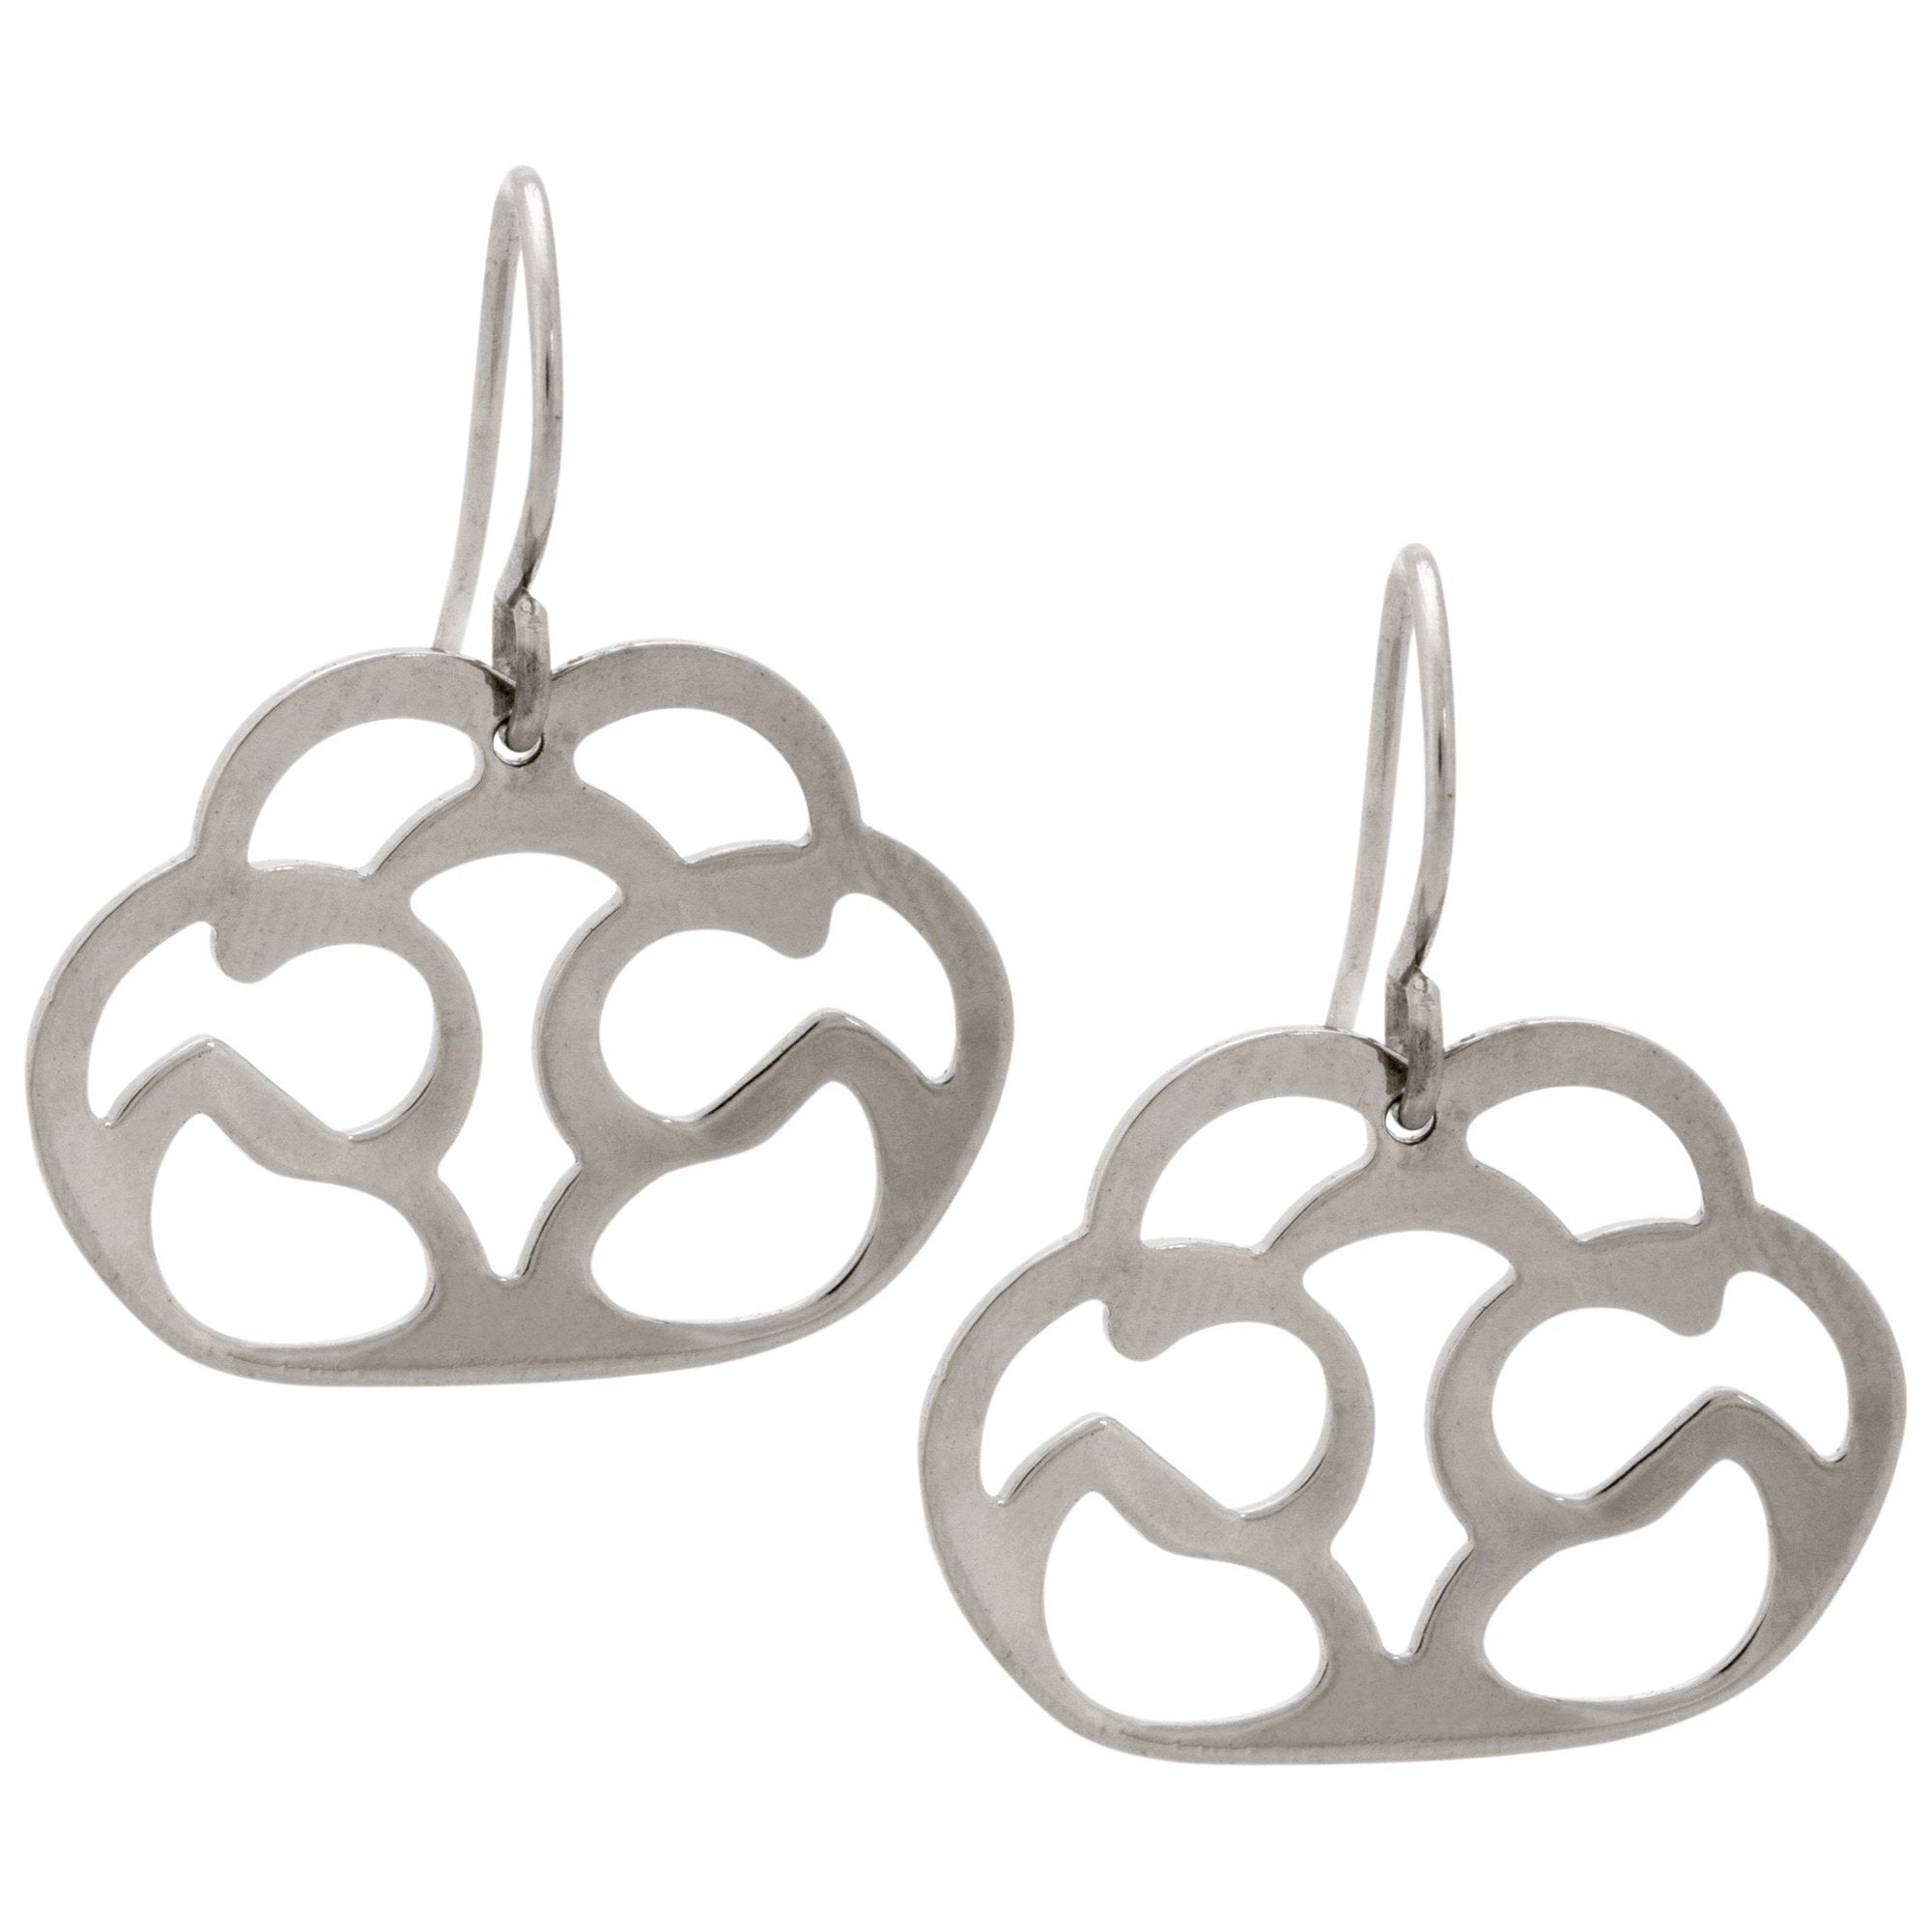 Purpose Freedom Earrings - Silver Plated